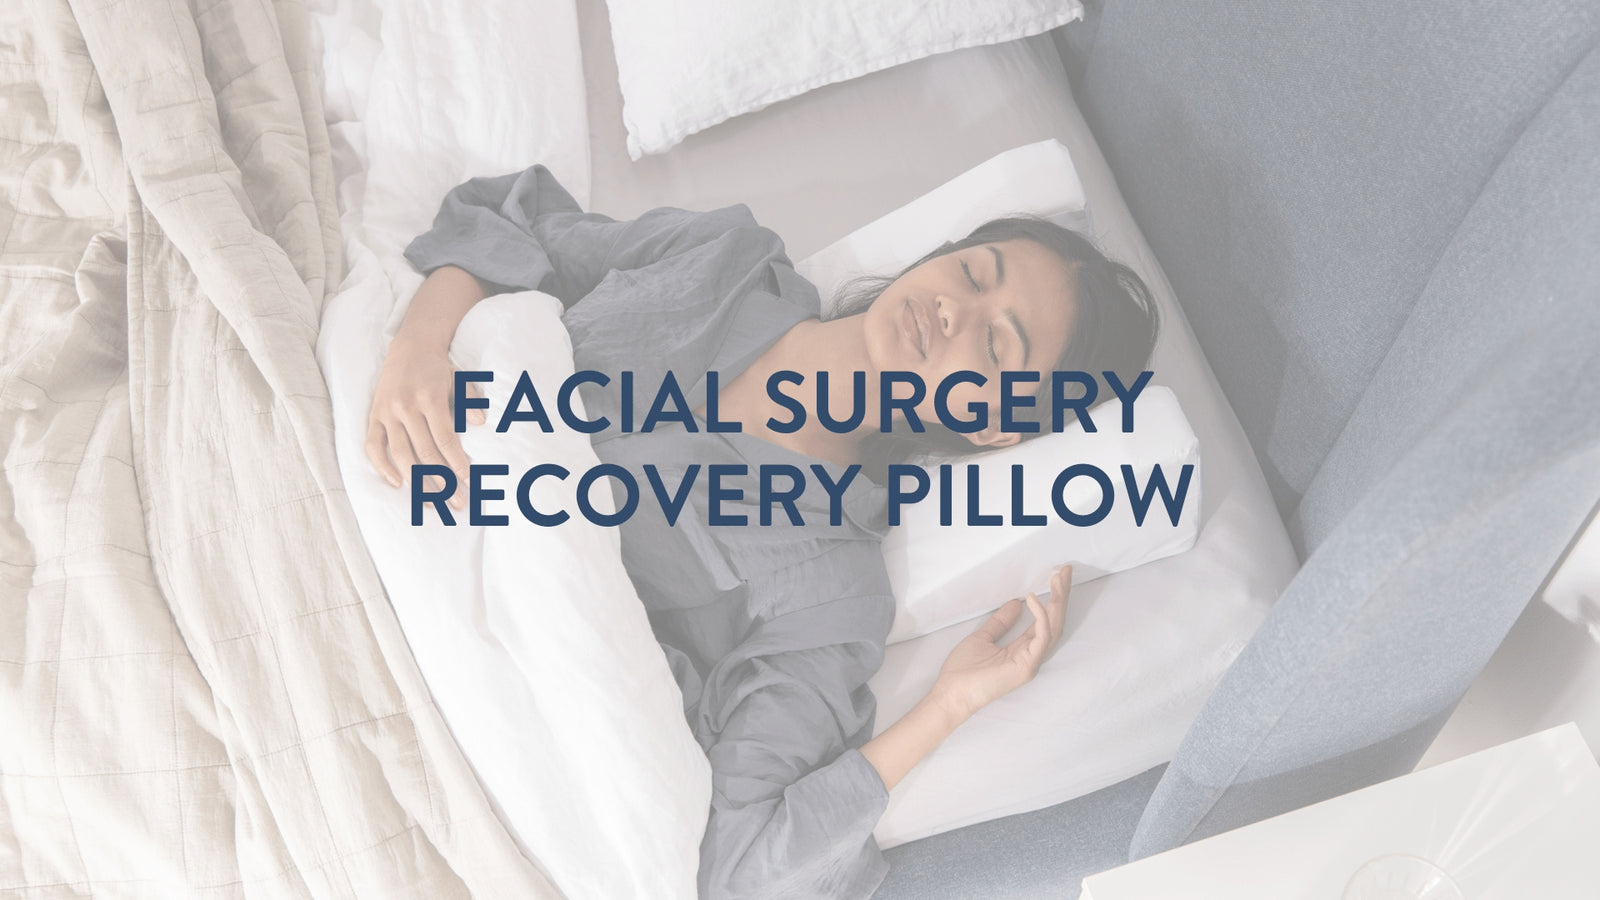 facial surgery pillow to keep you on your back when sleeping cushion propped up face lift thread lifts filler